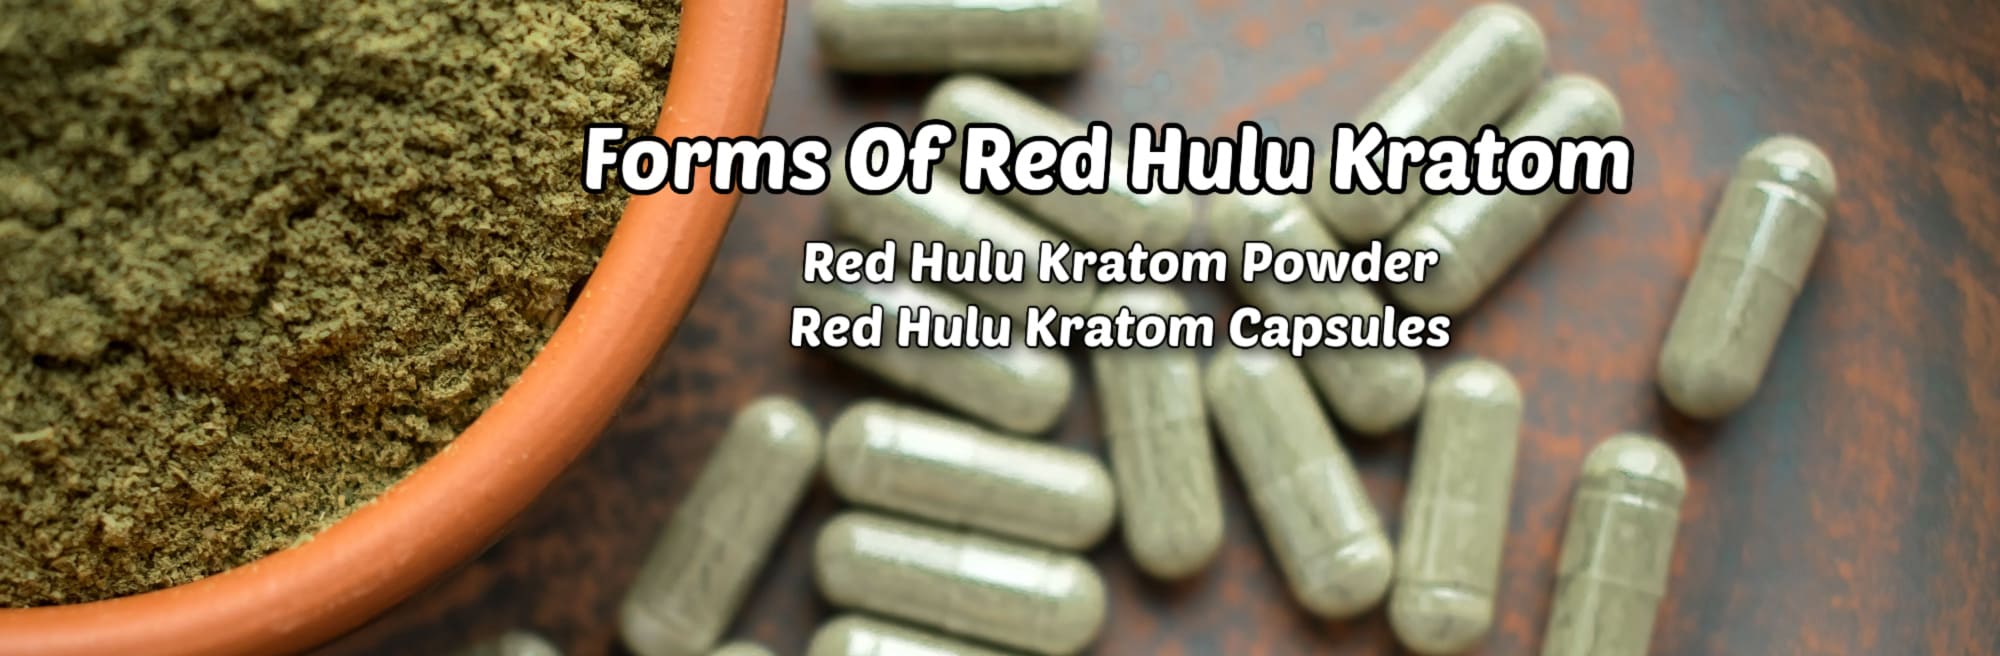 Red Hulu Kratom Benefits, Effects, And Dosage